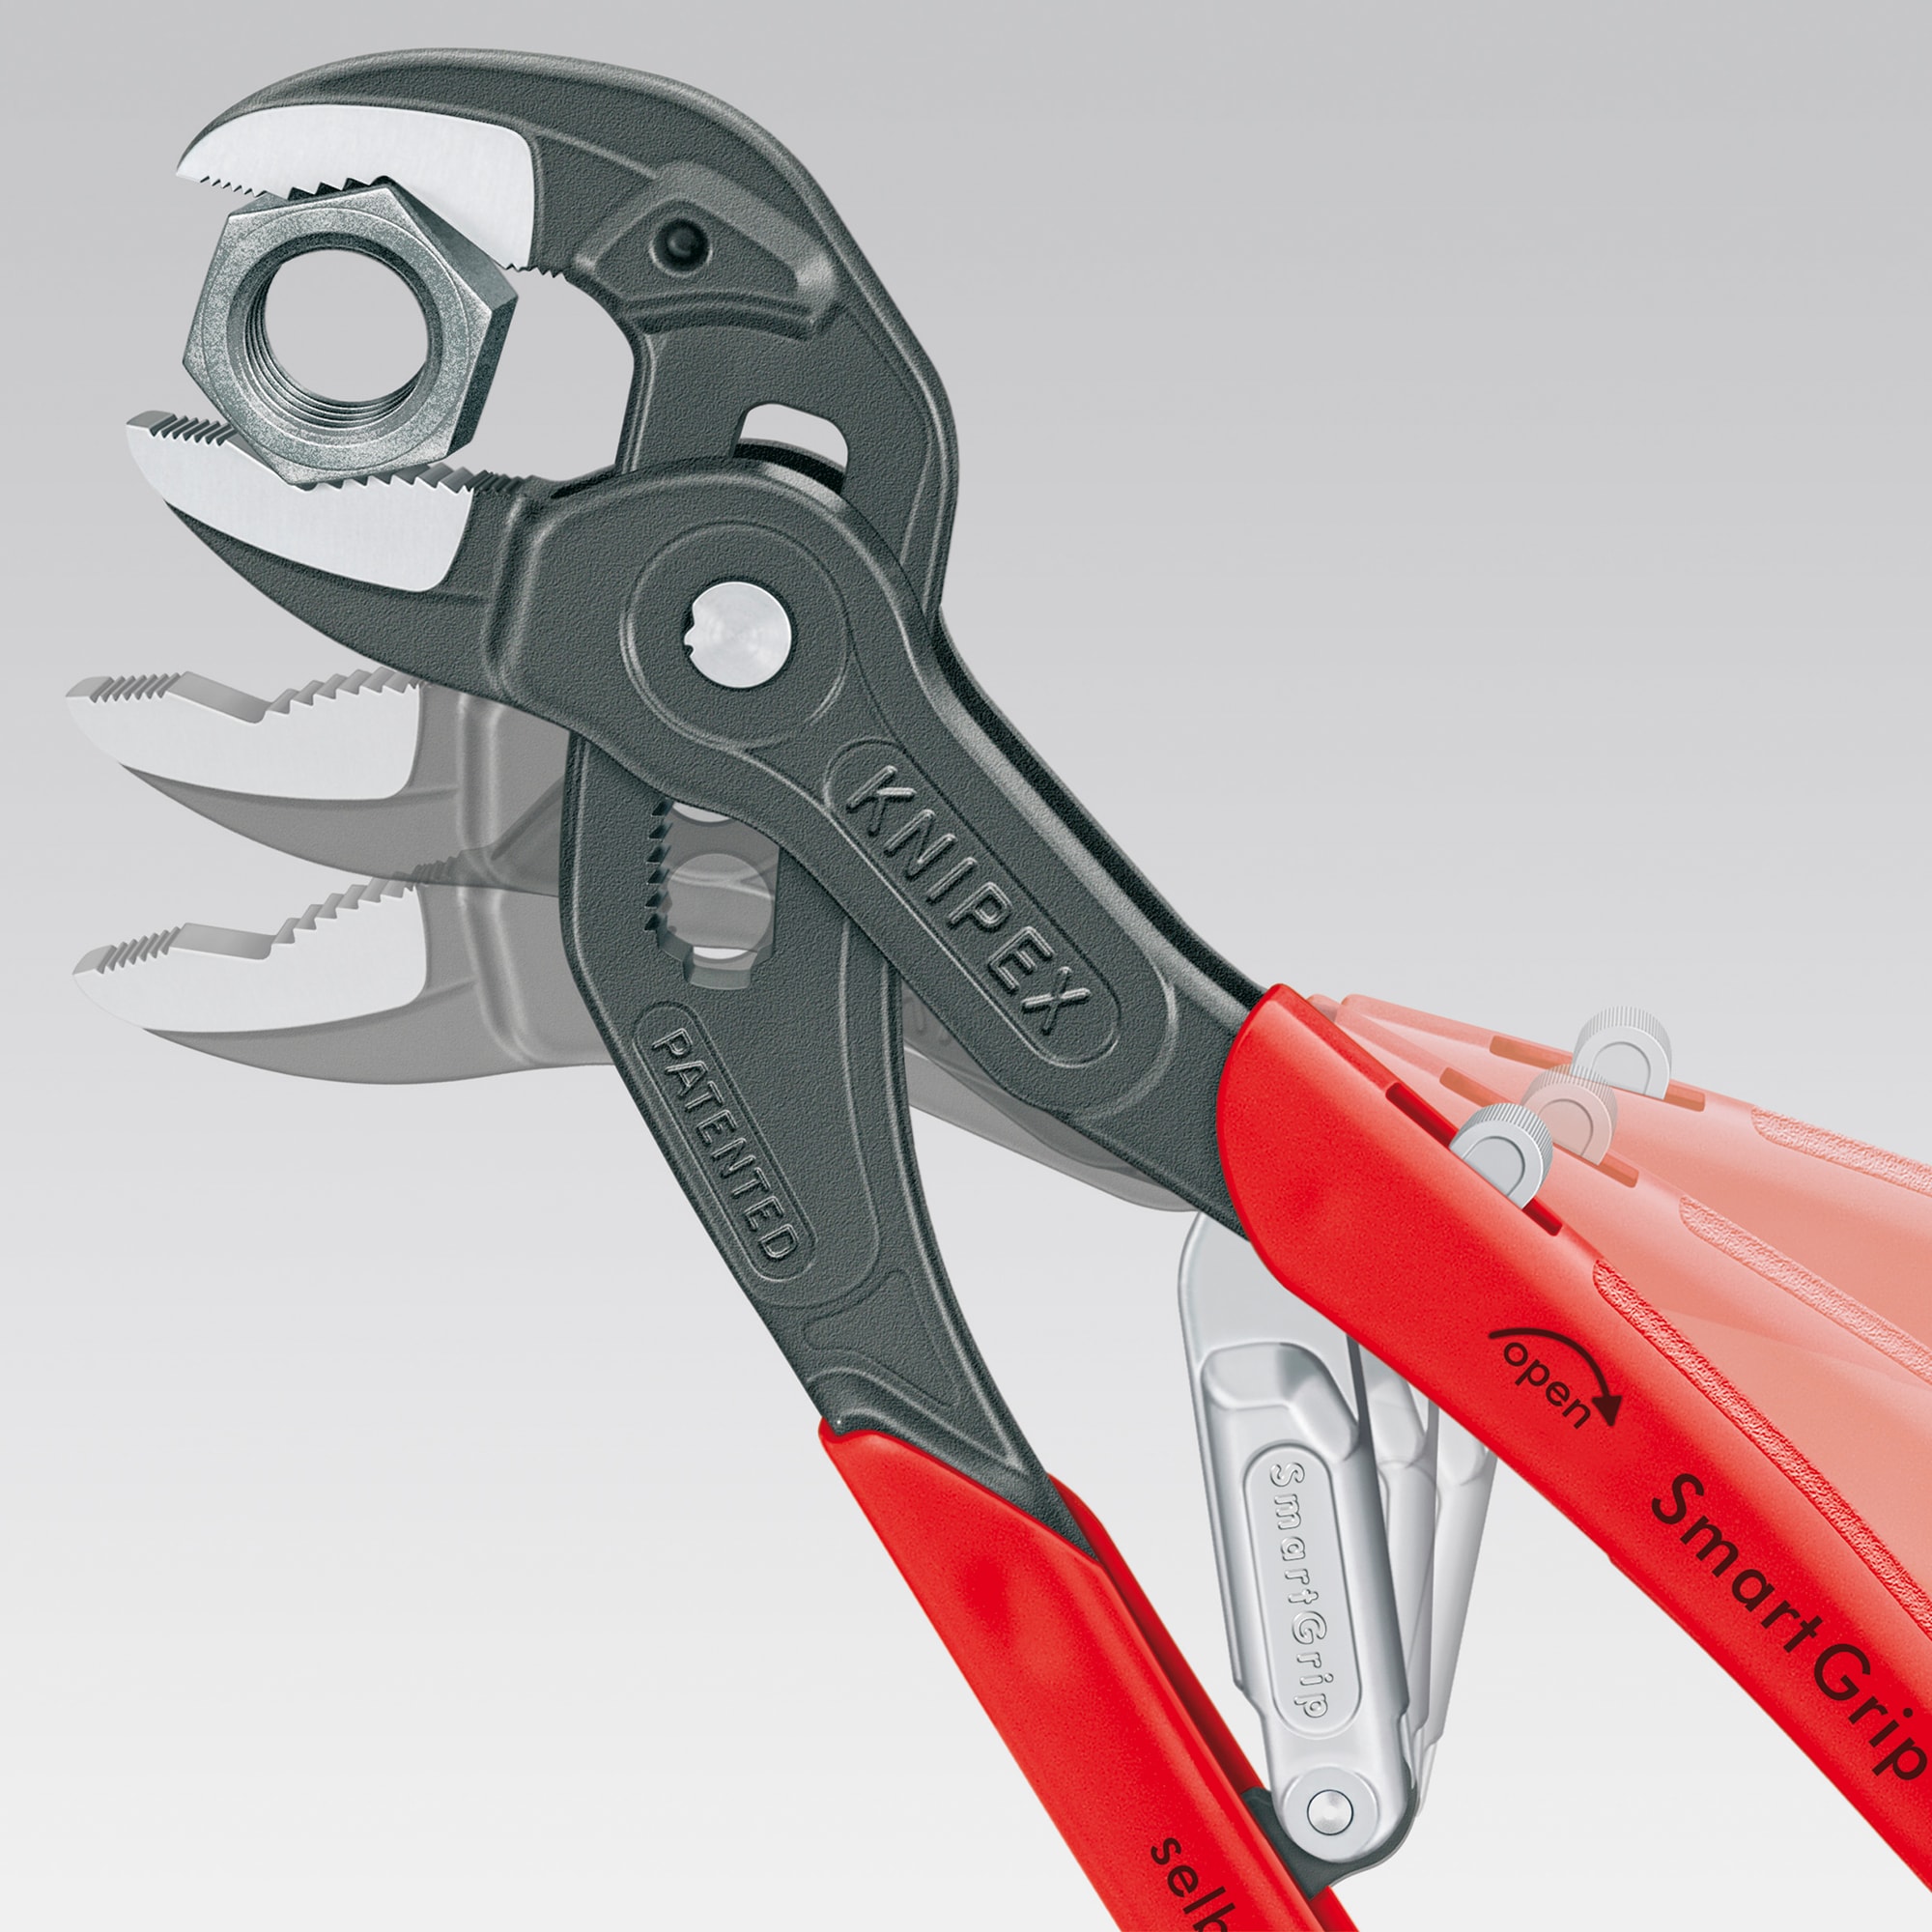 KNIPEX SmartGrip 10-in Home Repair Tongue and Groove Pliers in the